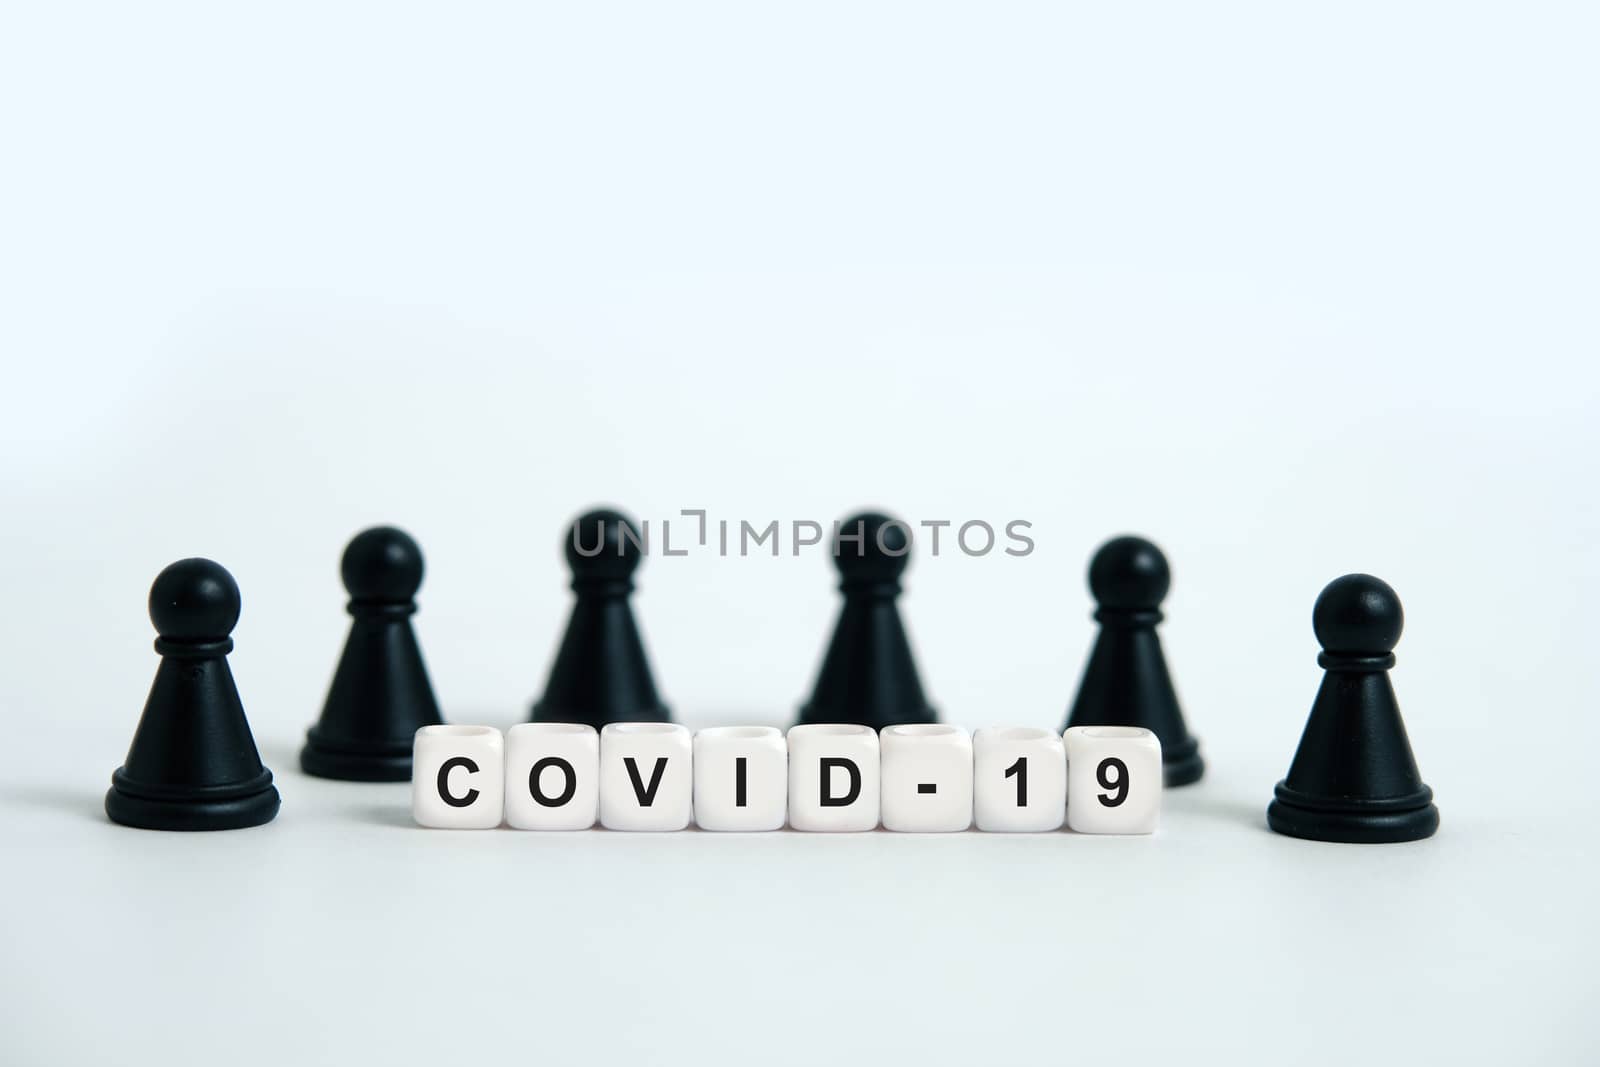 Pandemic coronavirus conceptual photography – stop spreading of COVID19 - word beads surrounded by chess pieces. Image Photo